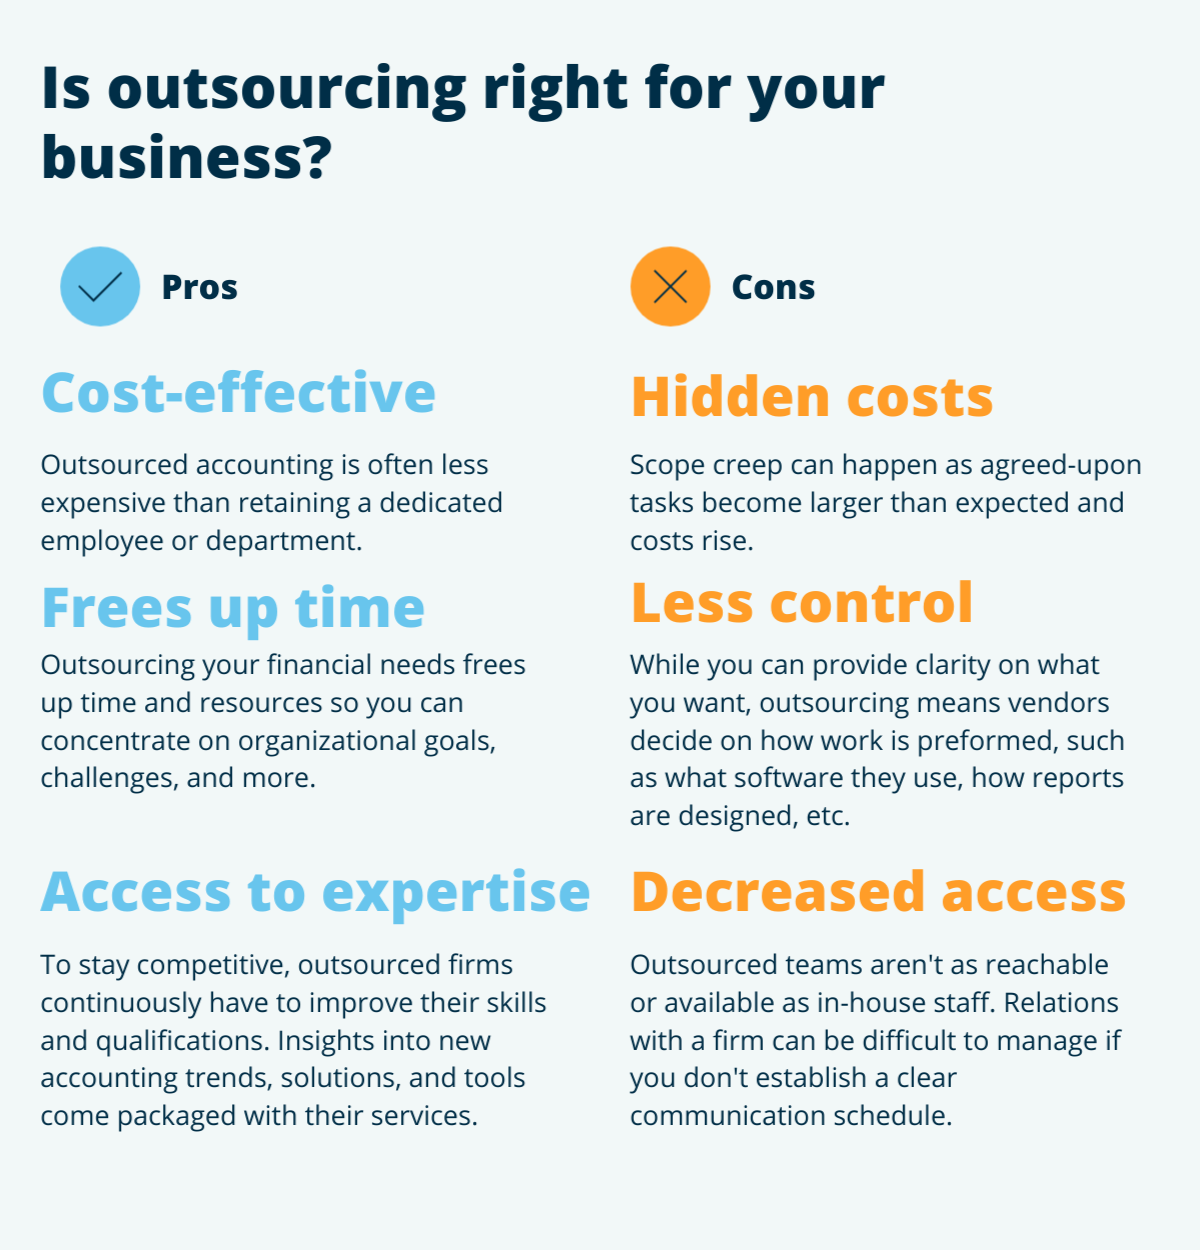 Is outsourcing right graphic for the blog article "Adaptability Is Key for Small Businesses as They Navigate the Accountant Shortage"